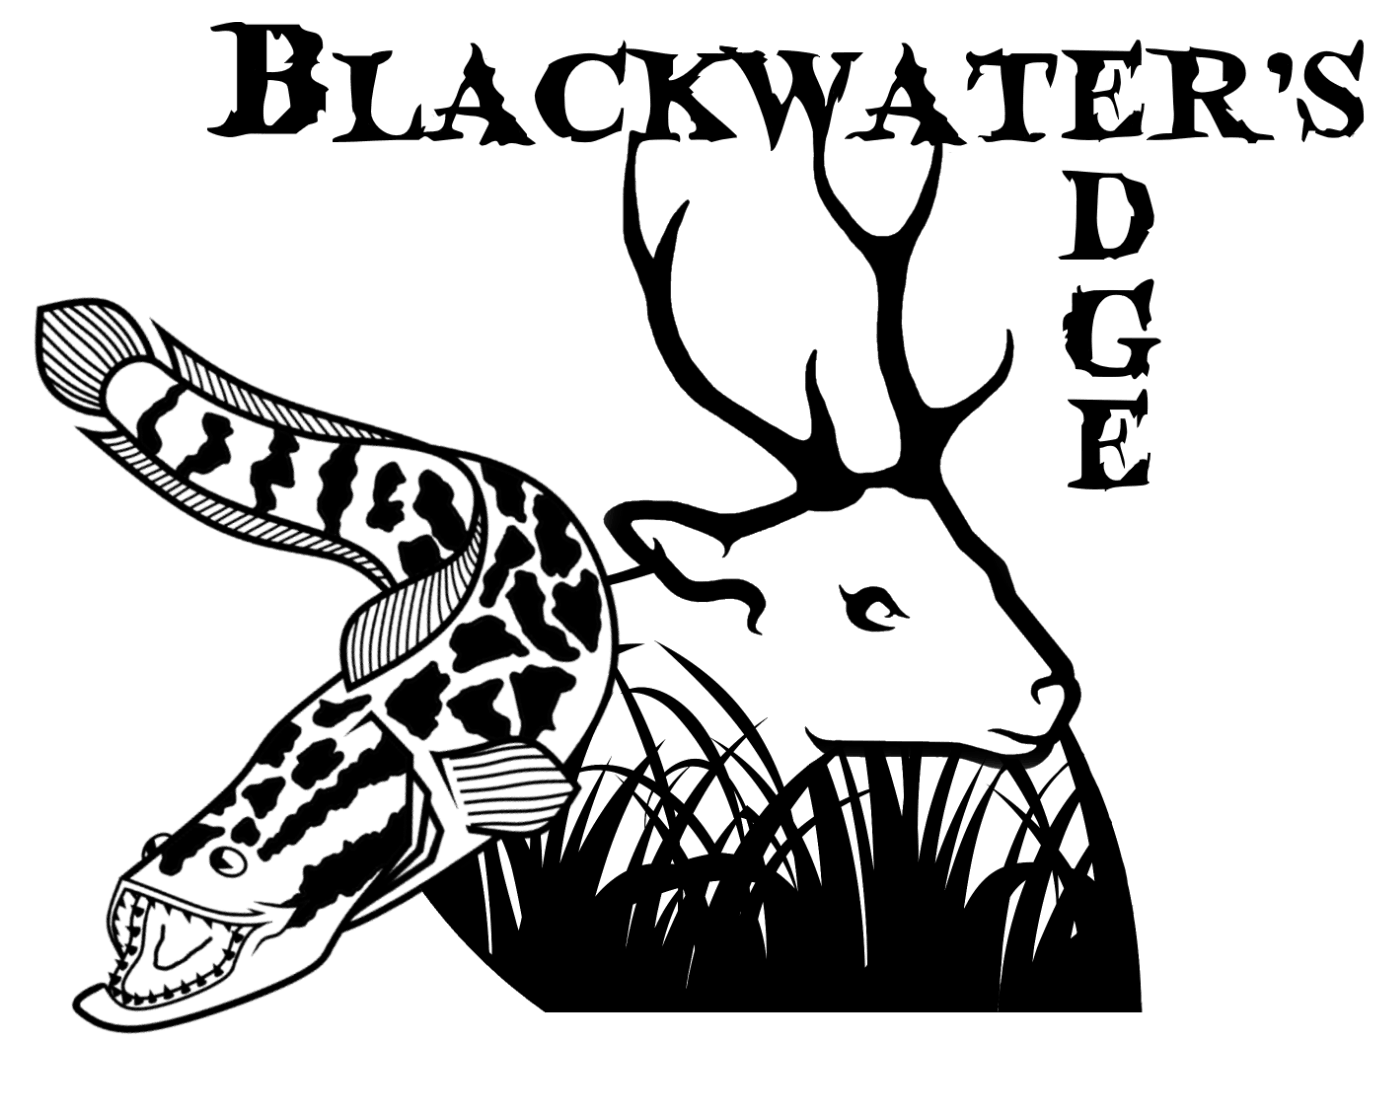 https://www.ccamd.org/wp-content/uploads/2020/05/Blackwaters-Edge-logo.png